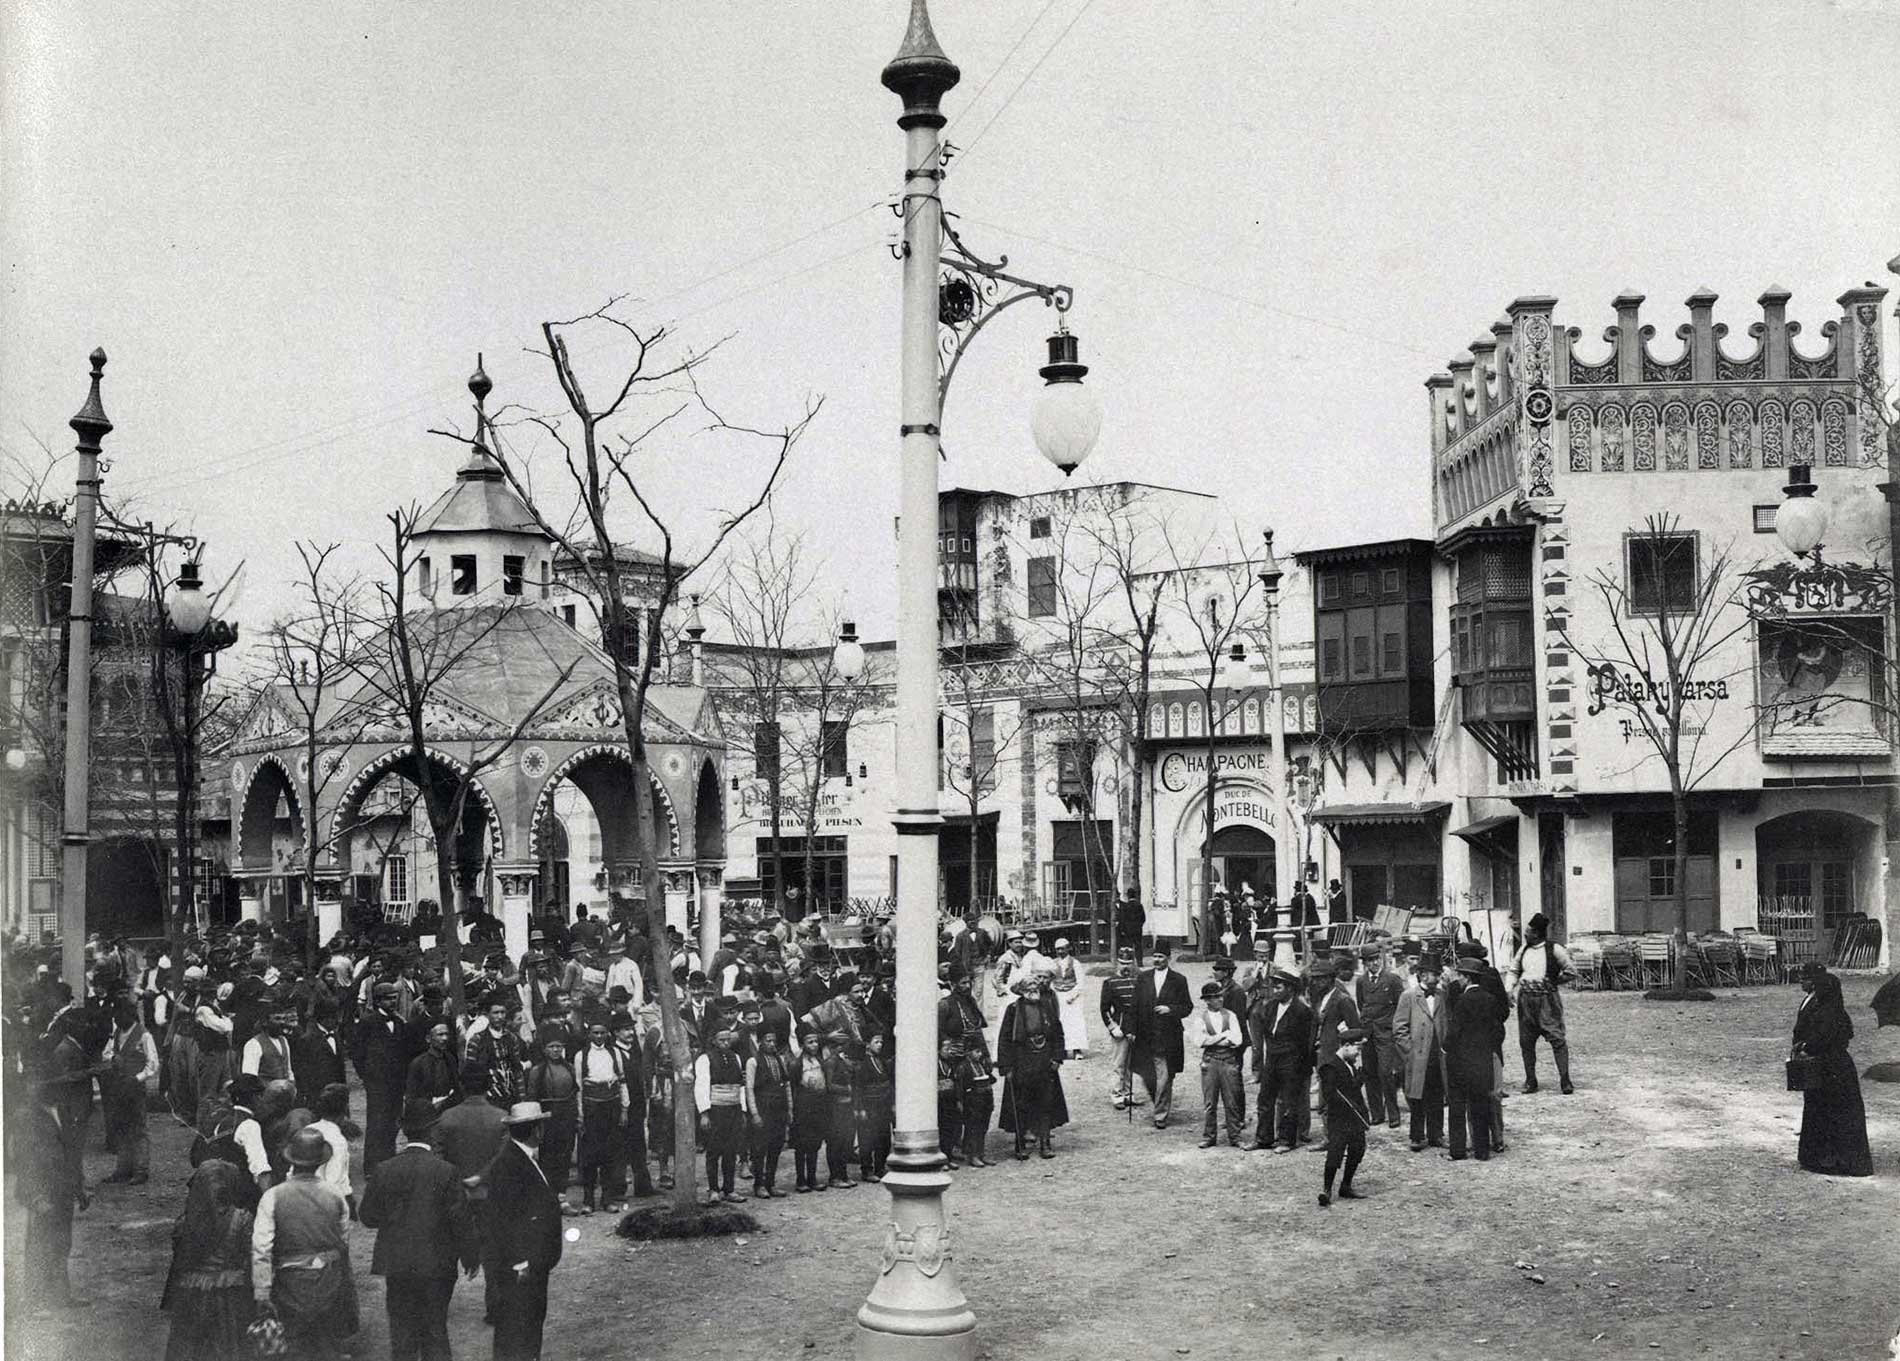 Millennium exhibition: Opening of the Ős-Budavár entertainment complex. The photo was made in 1896 (source: Fortepan / Budapest City Archives / Photos of György Klösz)